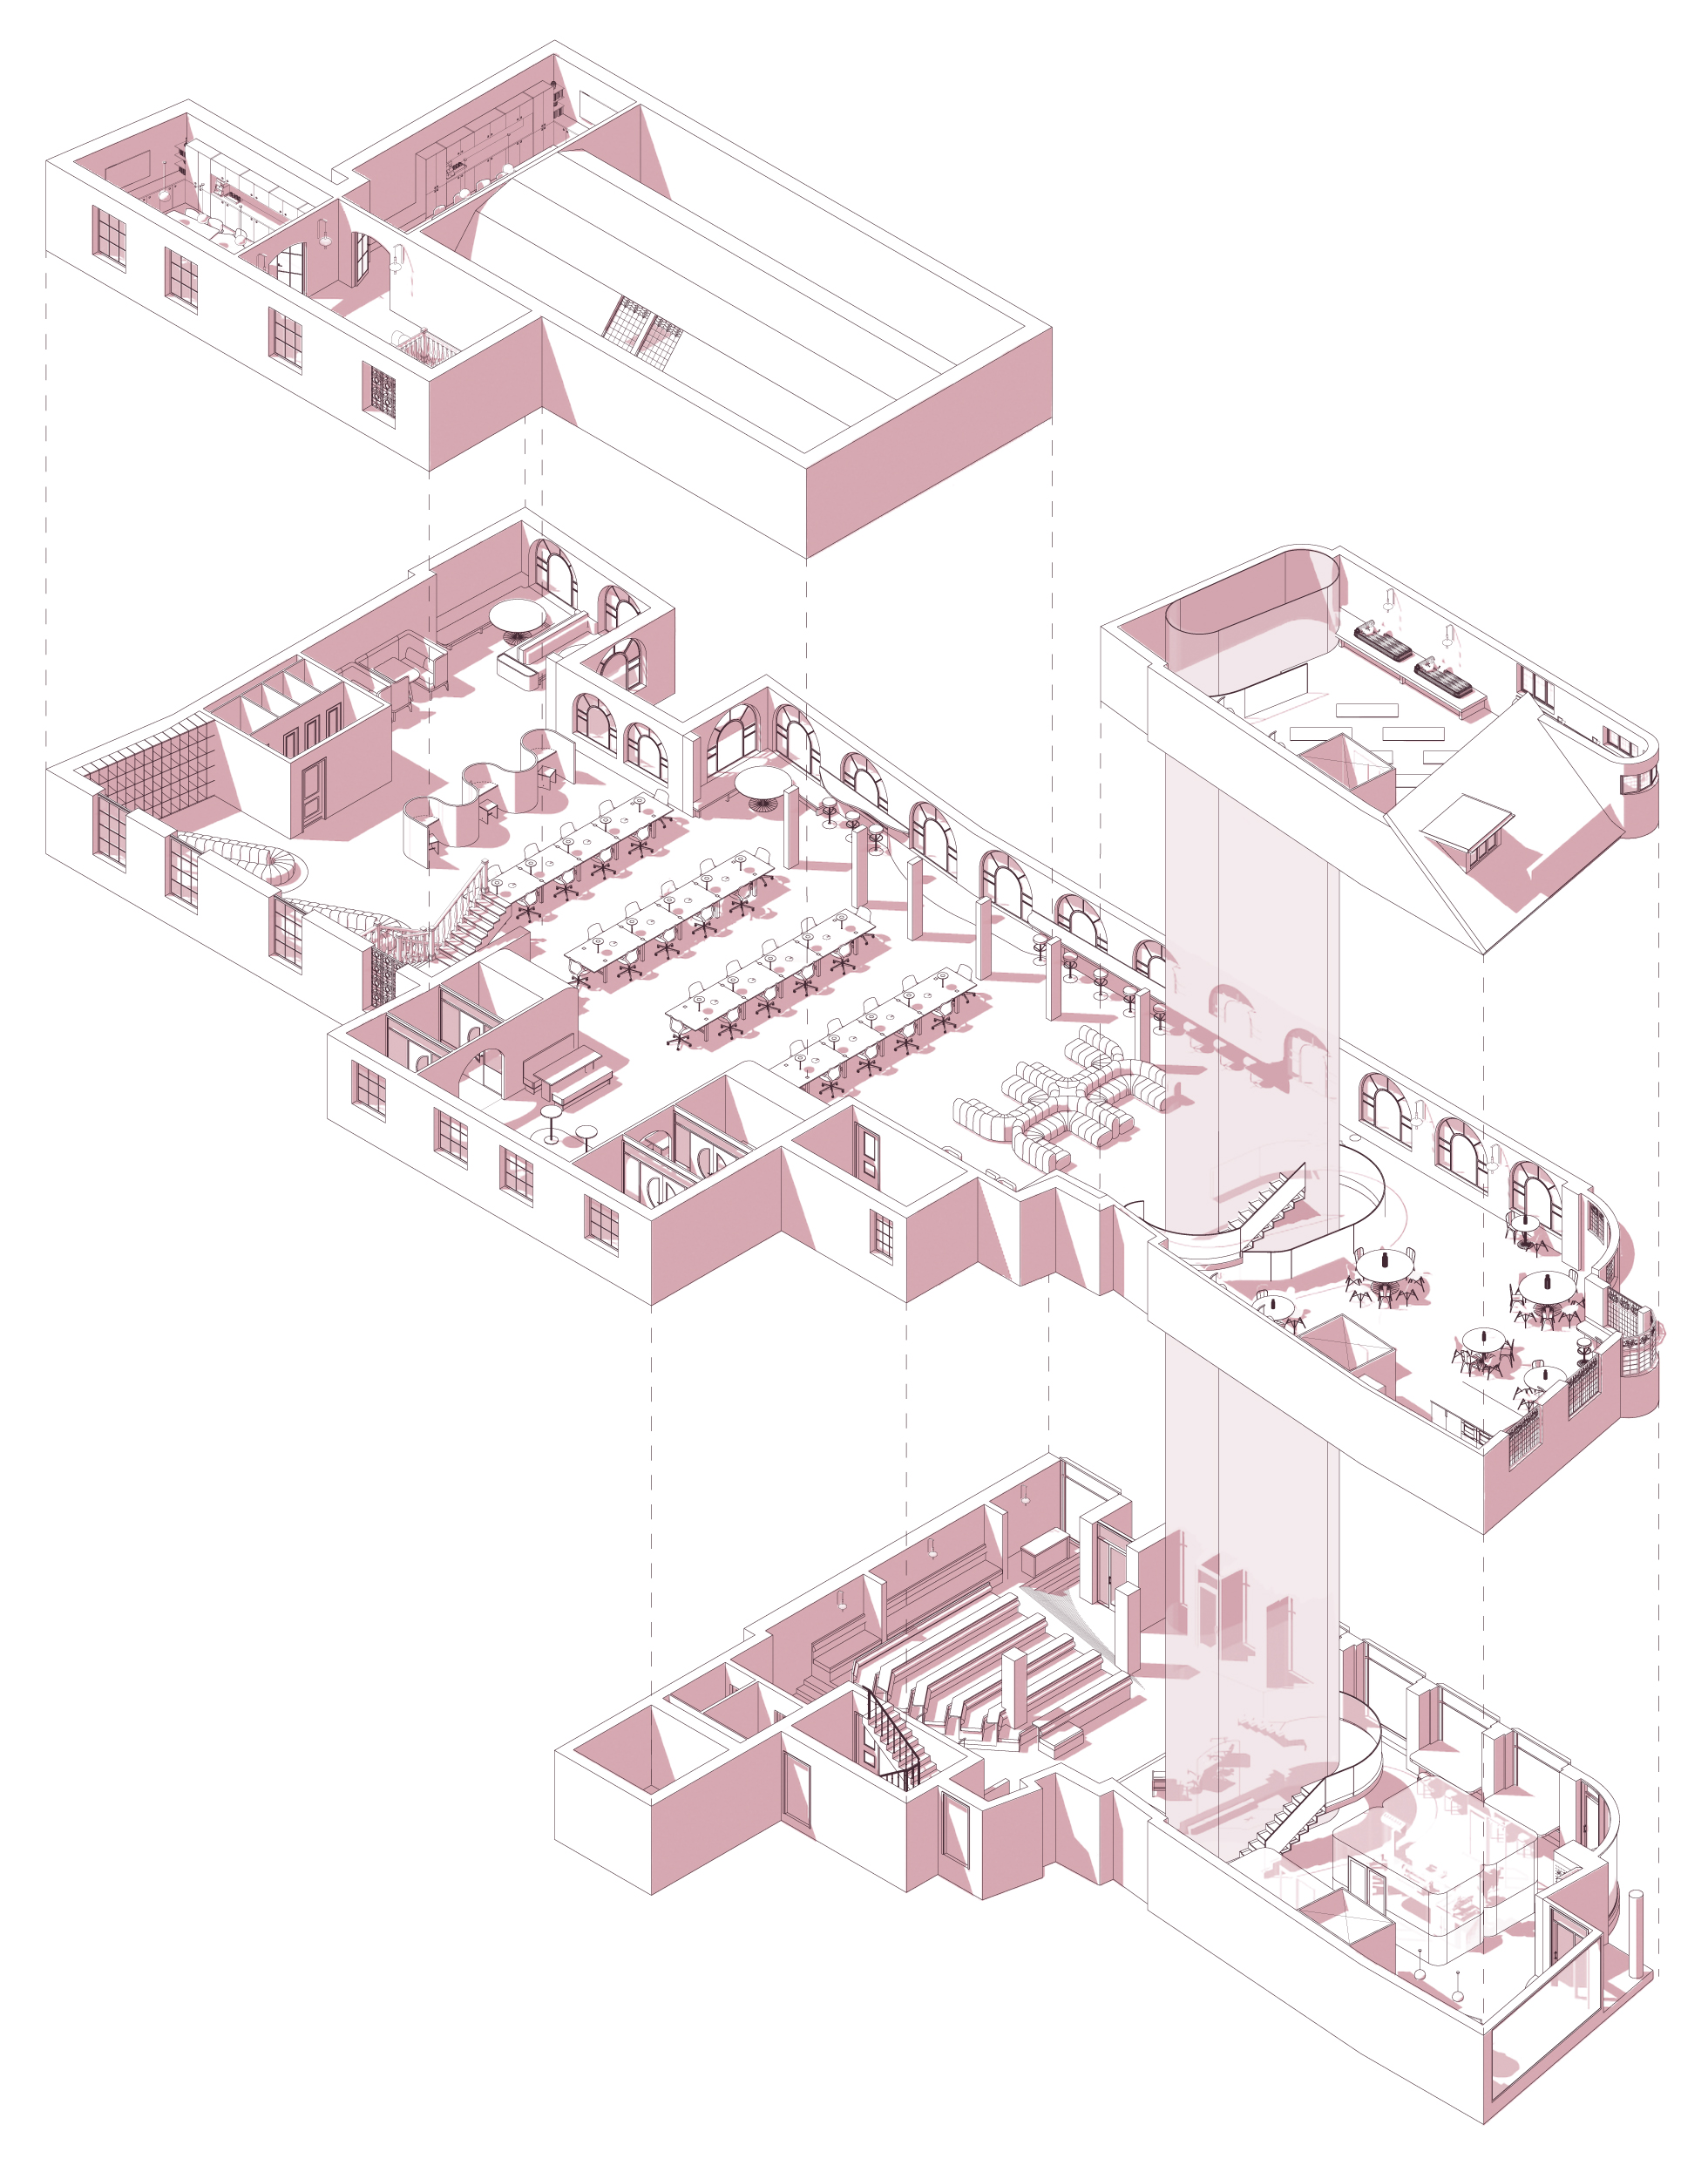 A monochromatic technical drawing depicting the three floors of the design in an exploded axonometric view.